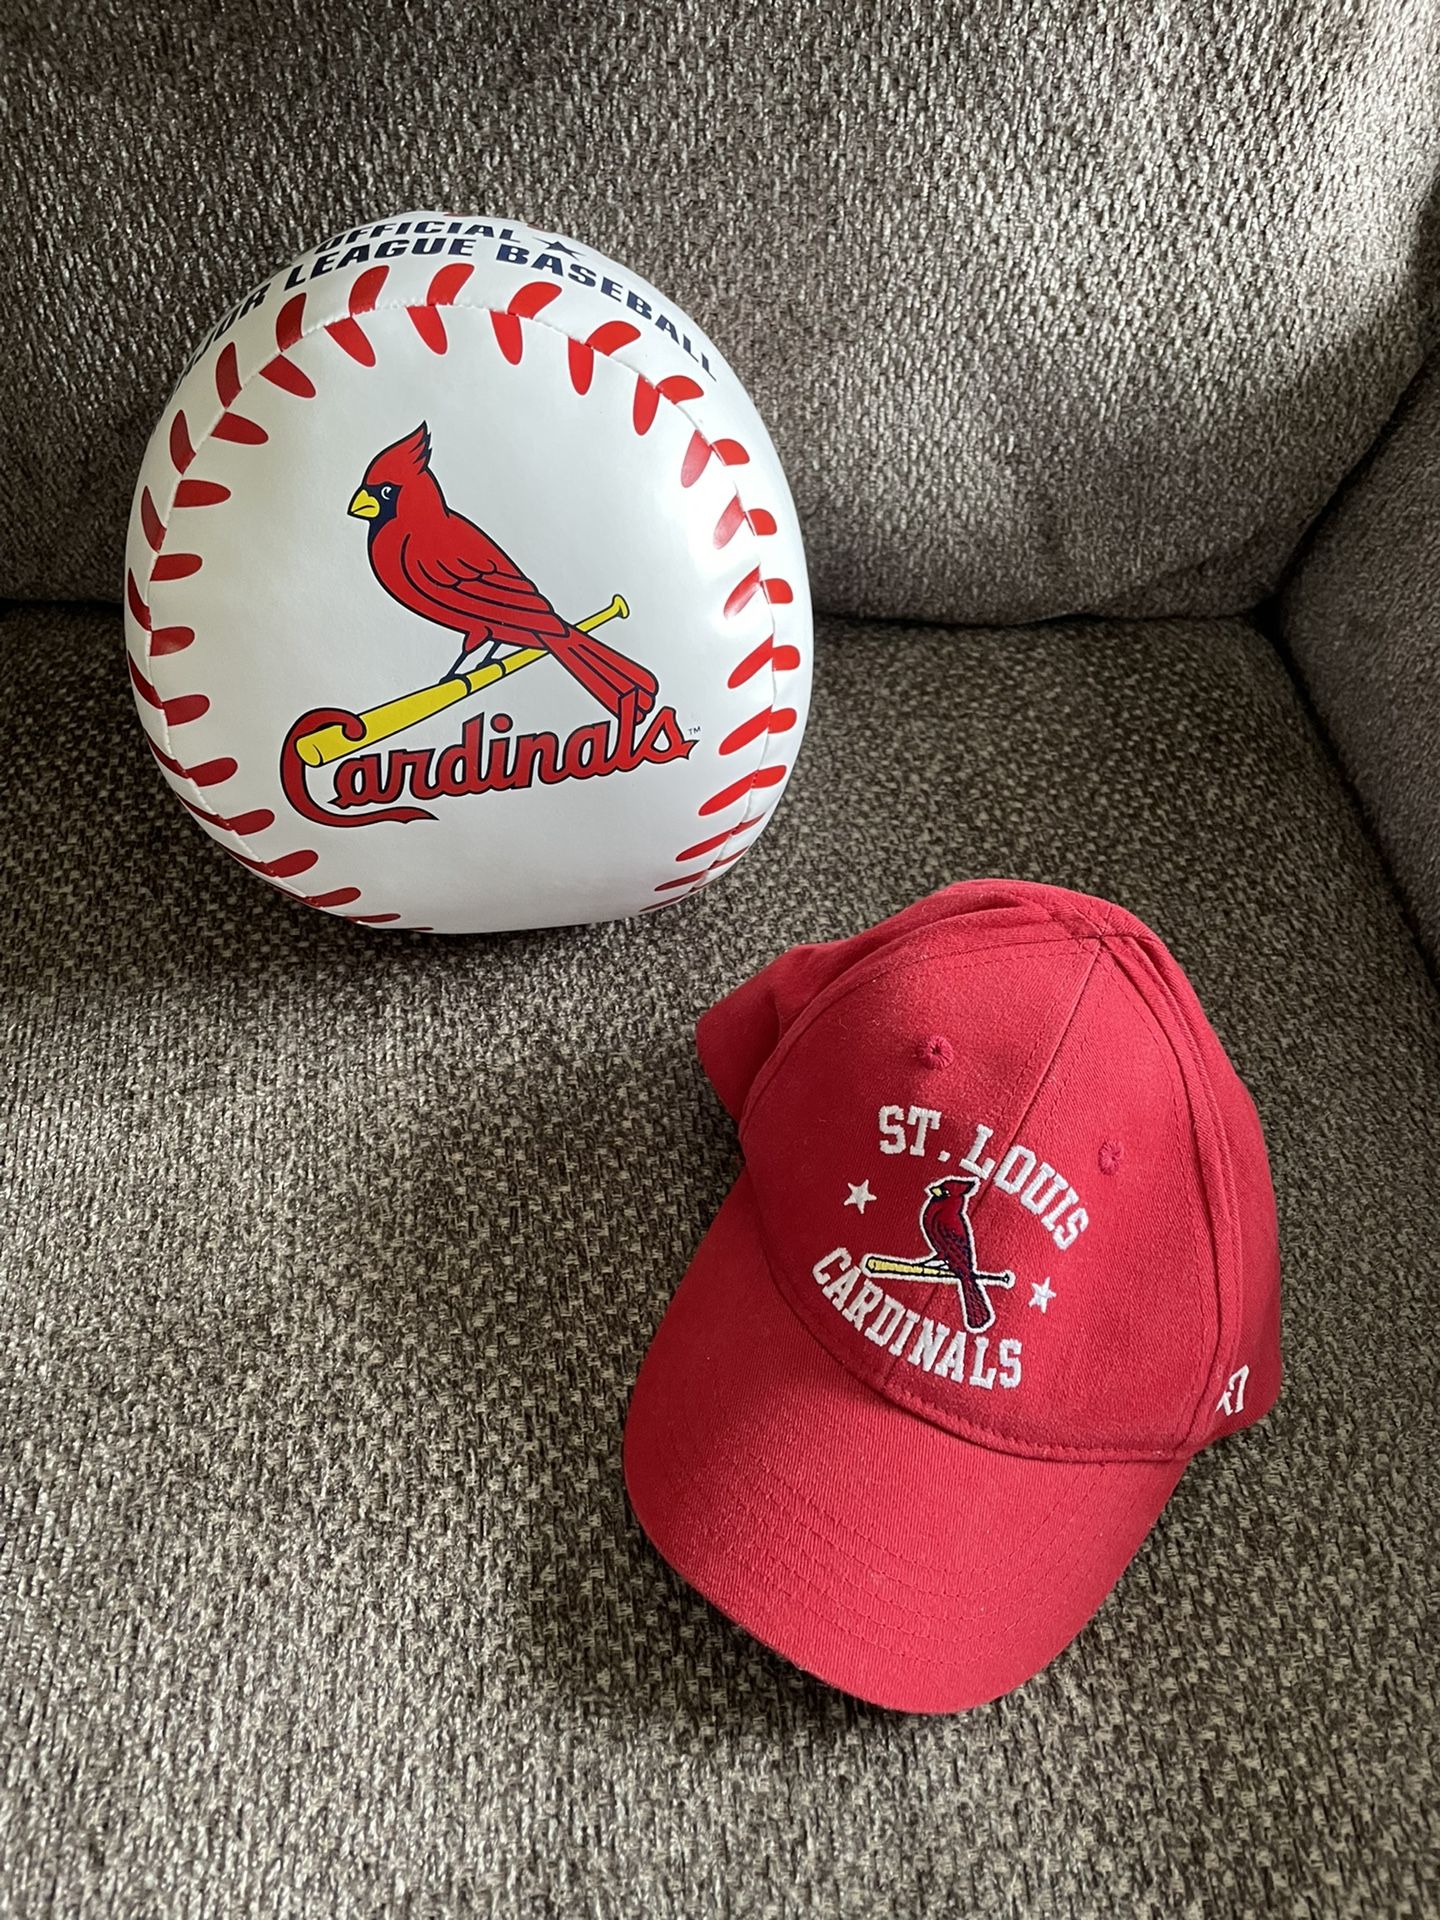 St. Louis Cardinals infant baseball hat with large soft St. Louis Cardinals ball